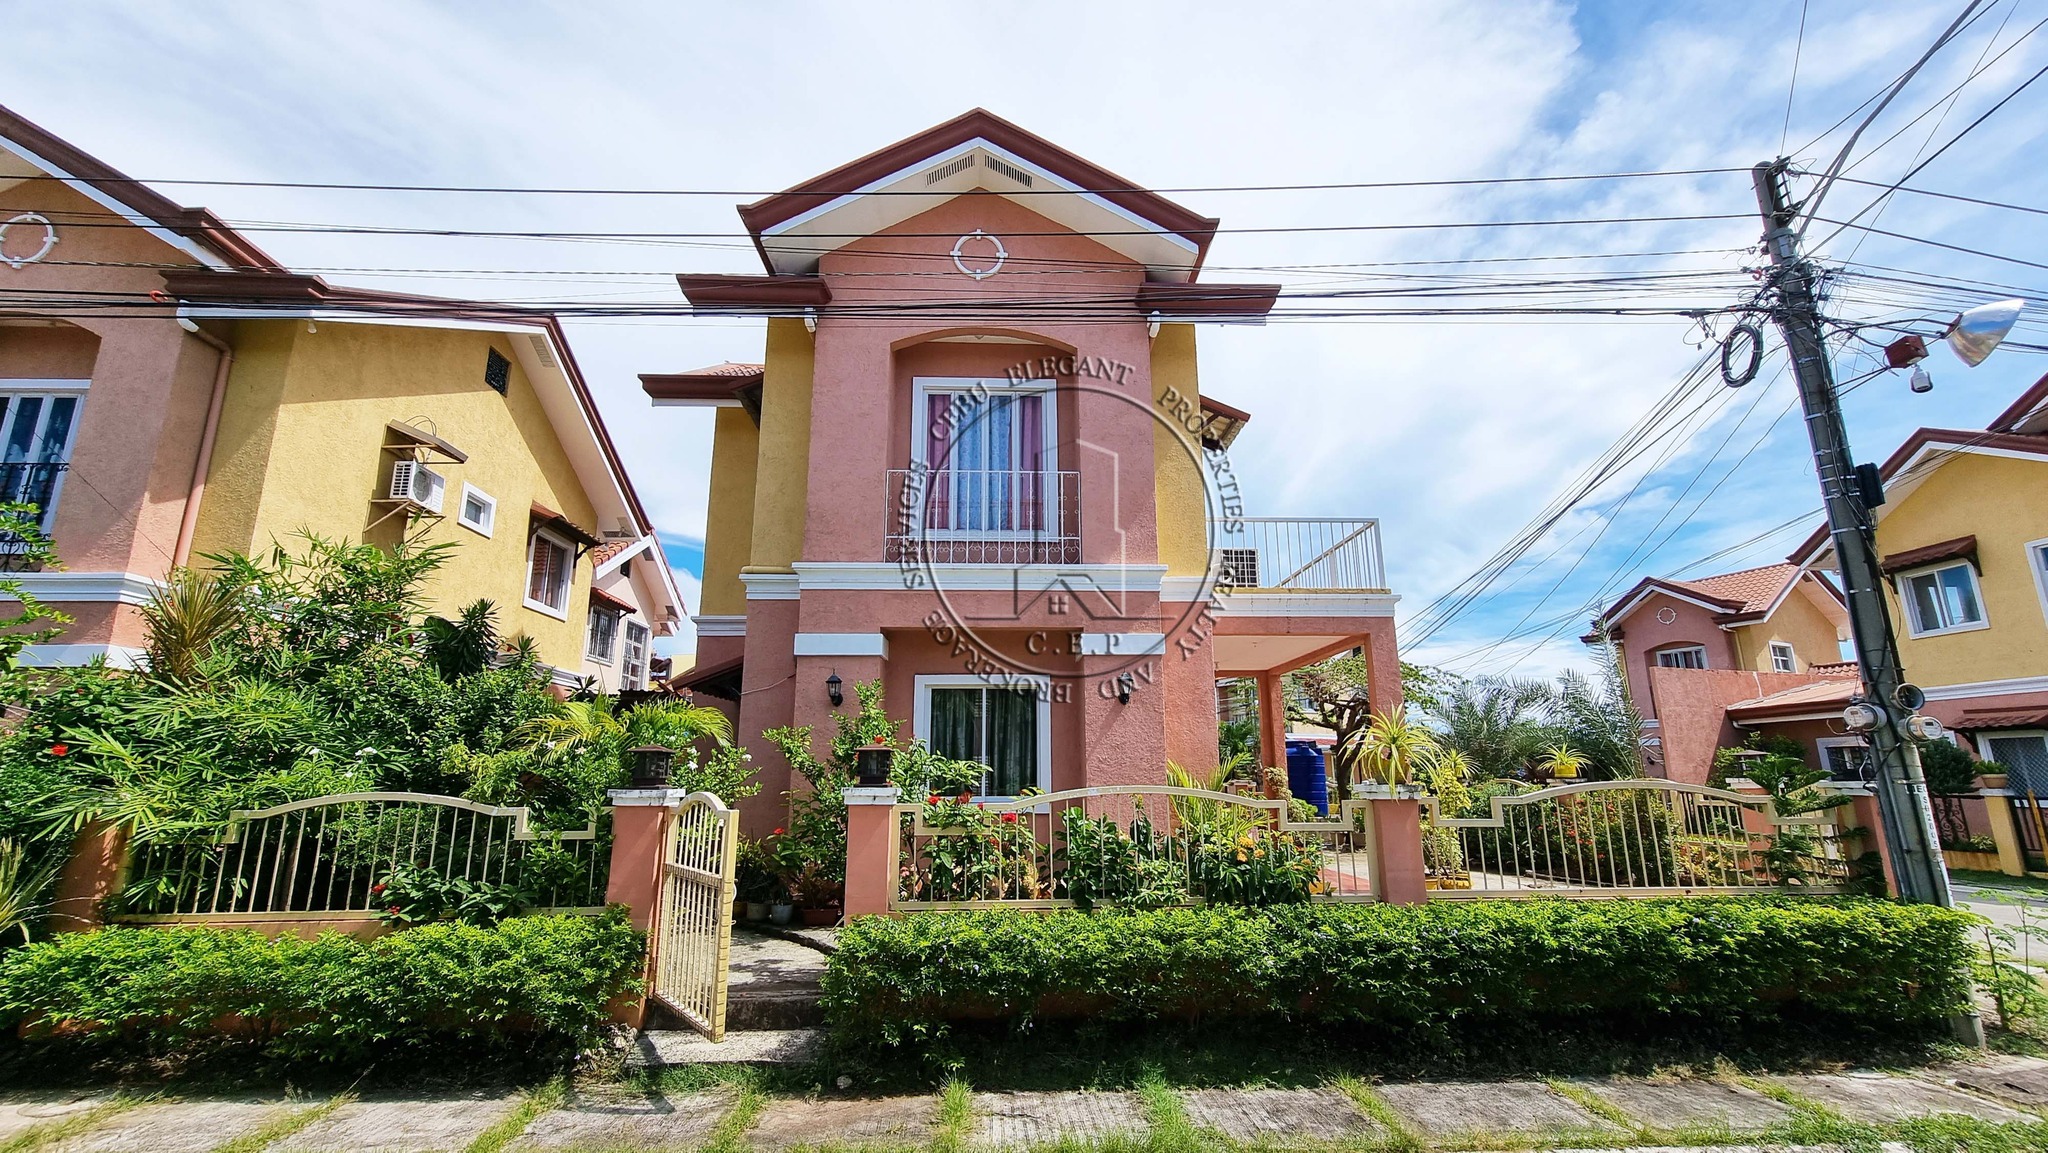 4 Bedroom House and Lot for Sale in Mactan Cebu